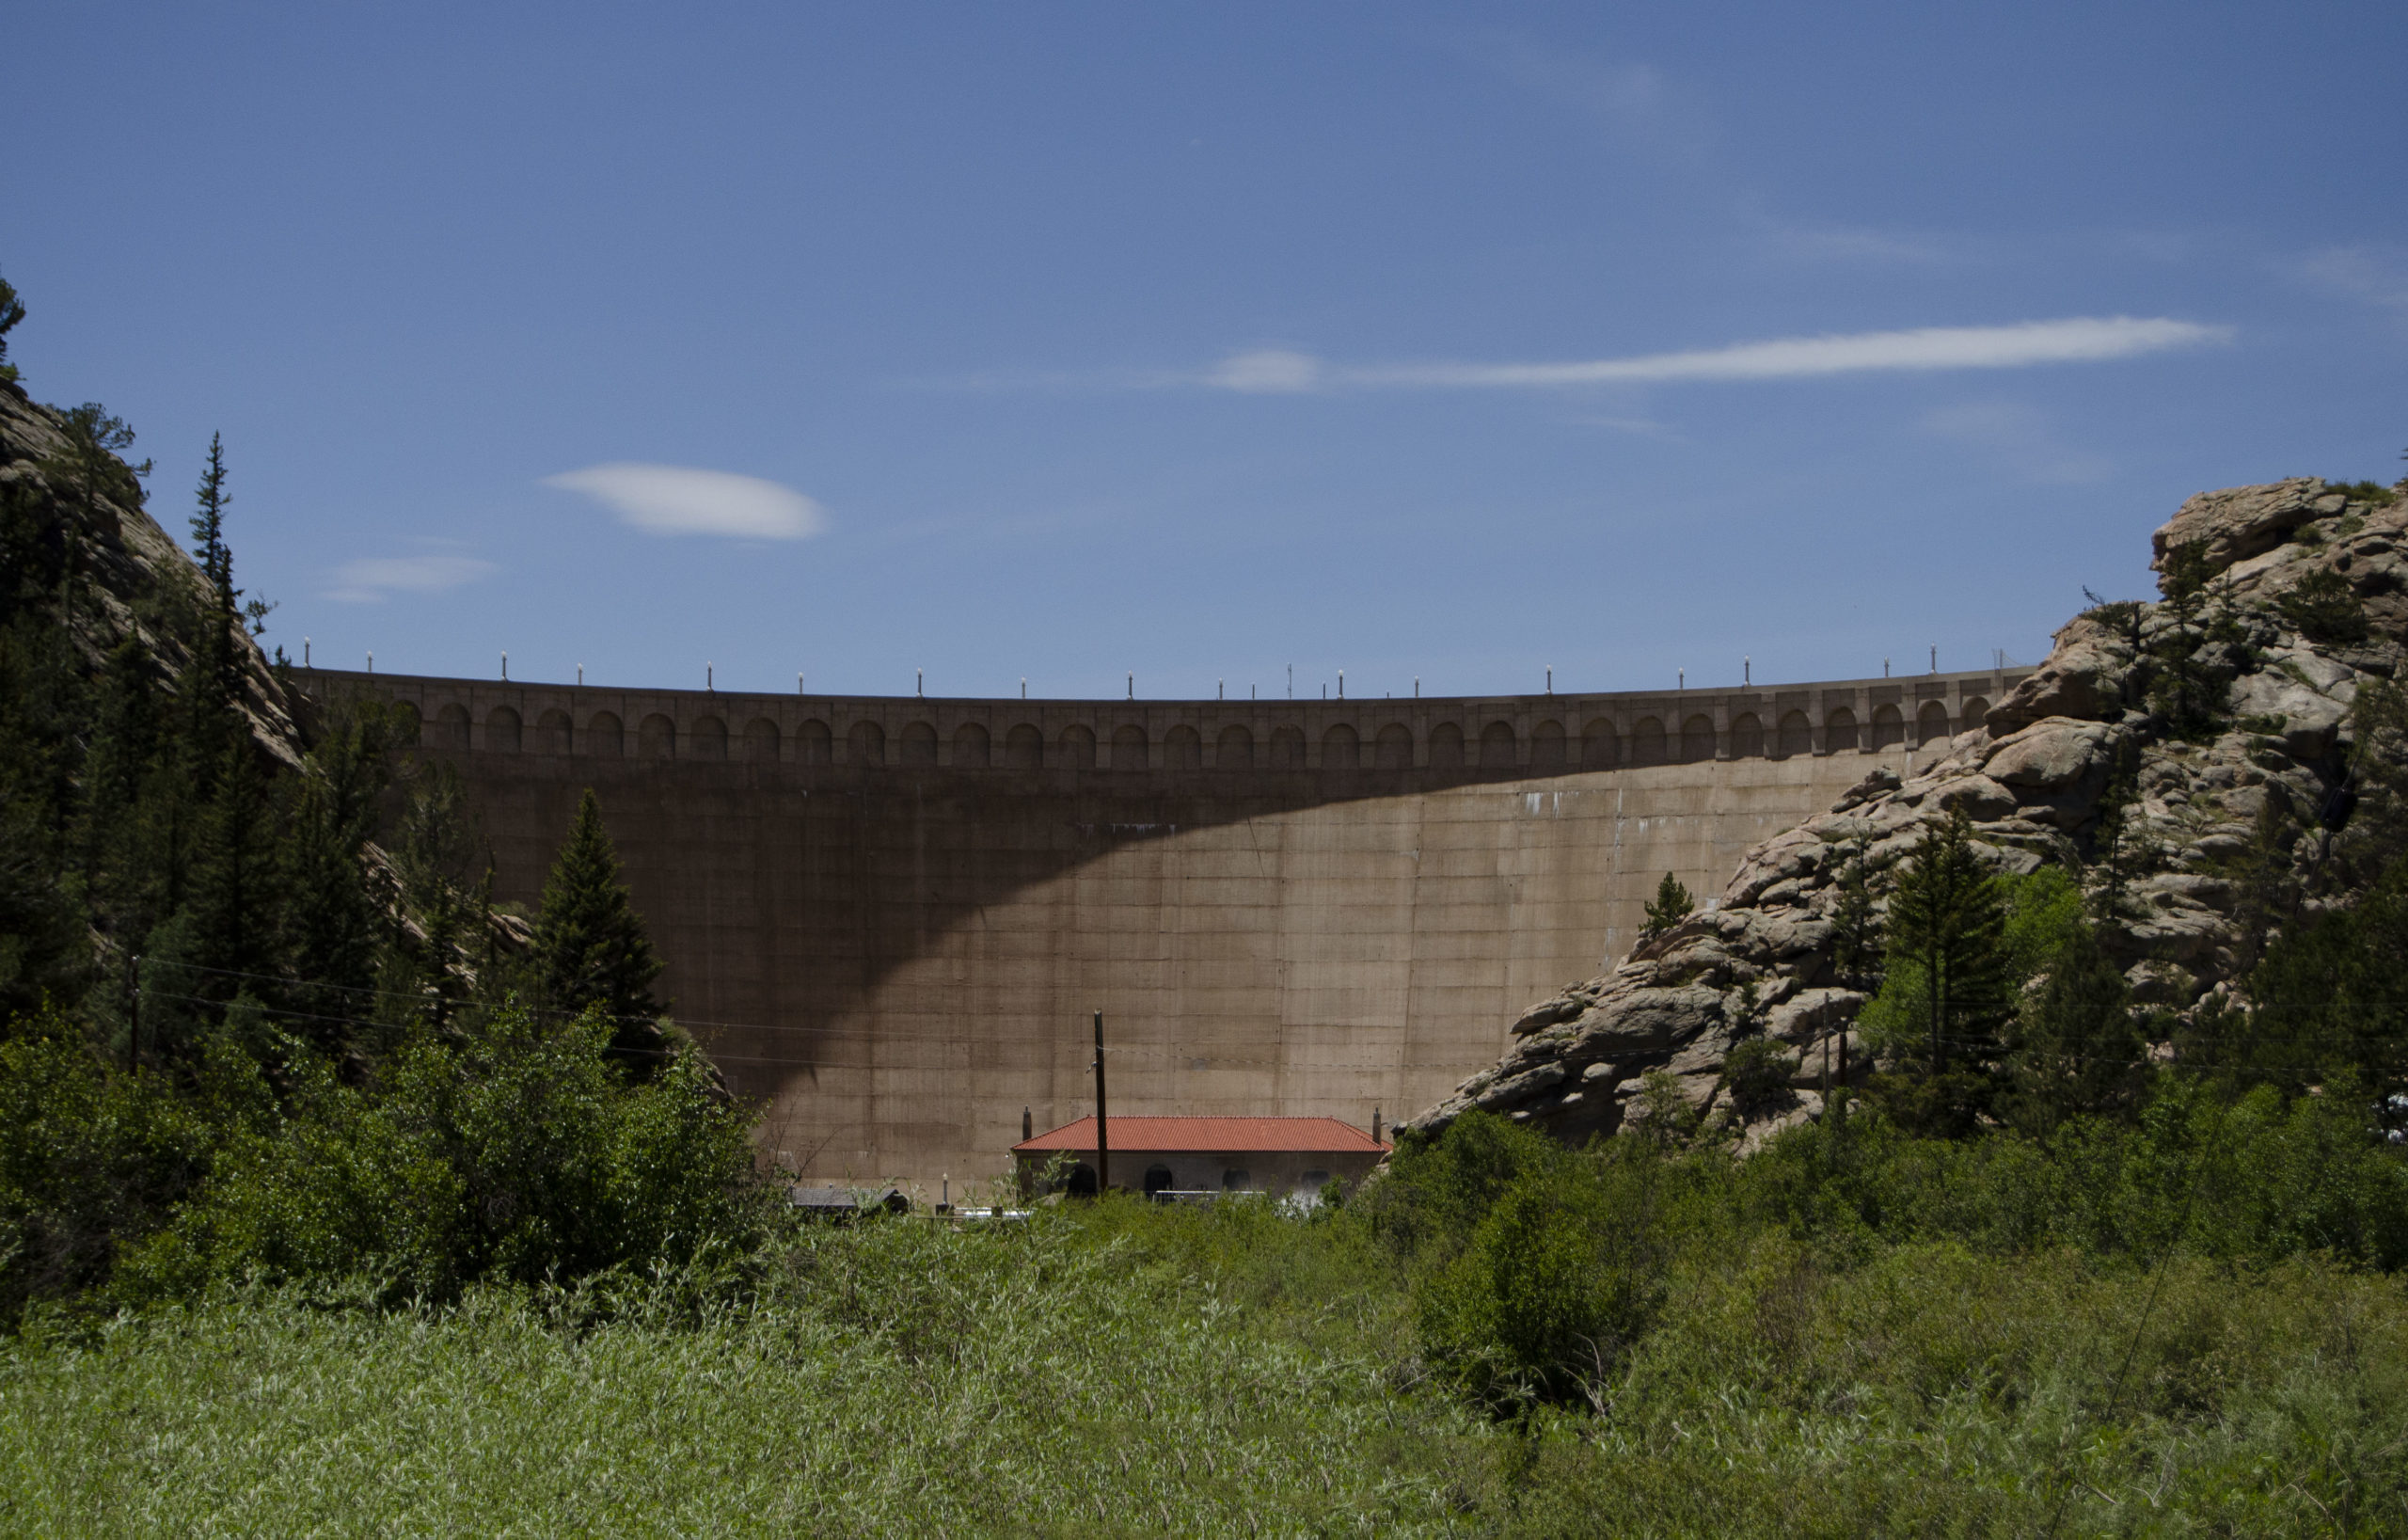 Eleven Mile Canyon Reservoir was completed in 1932 and stands 135 feet above the South Platte riverbed. Photo credit: Denver Water.